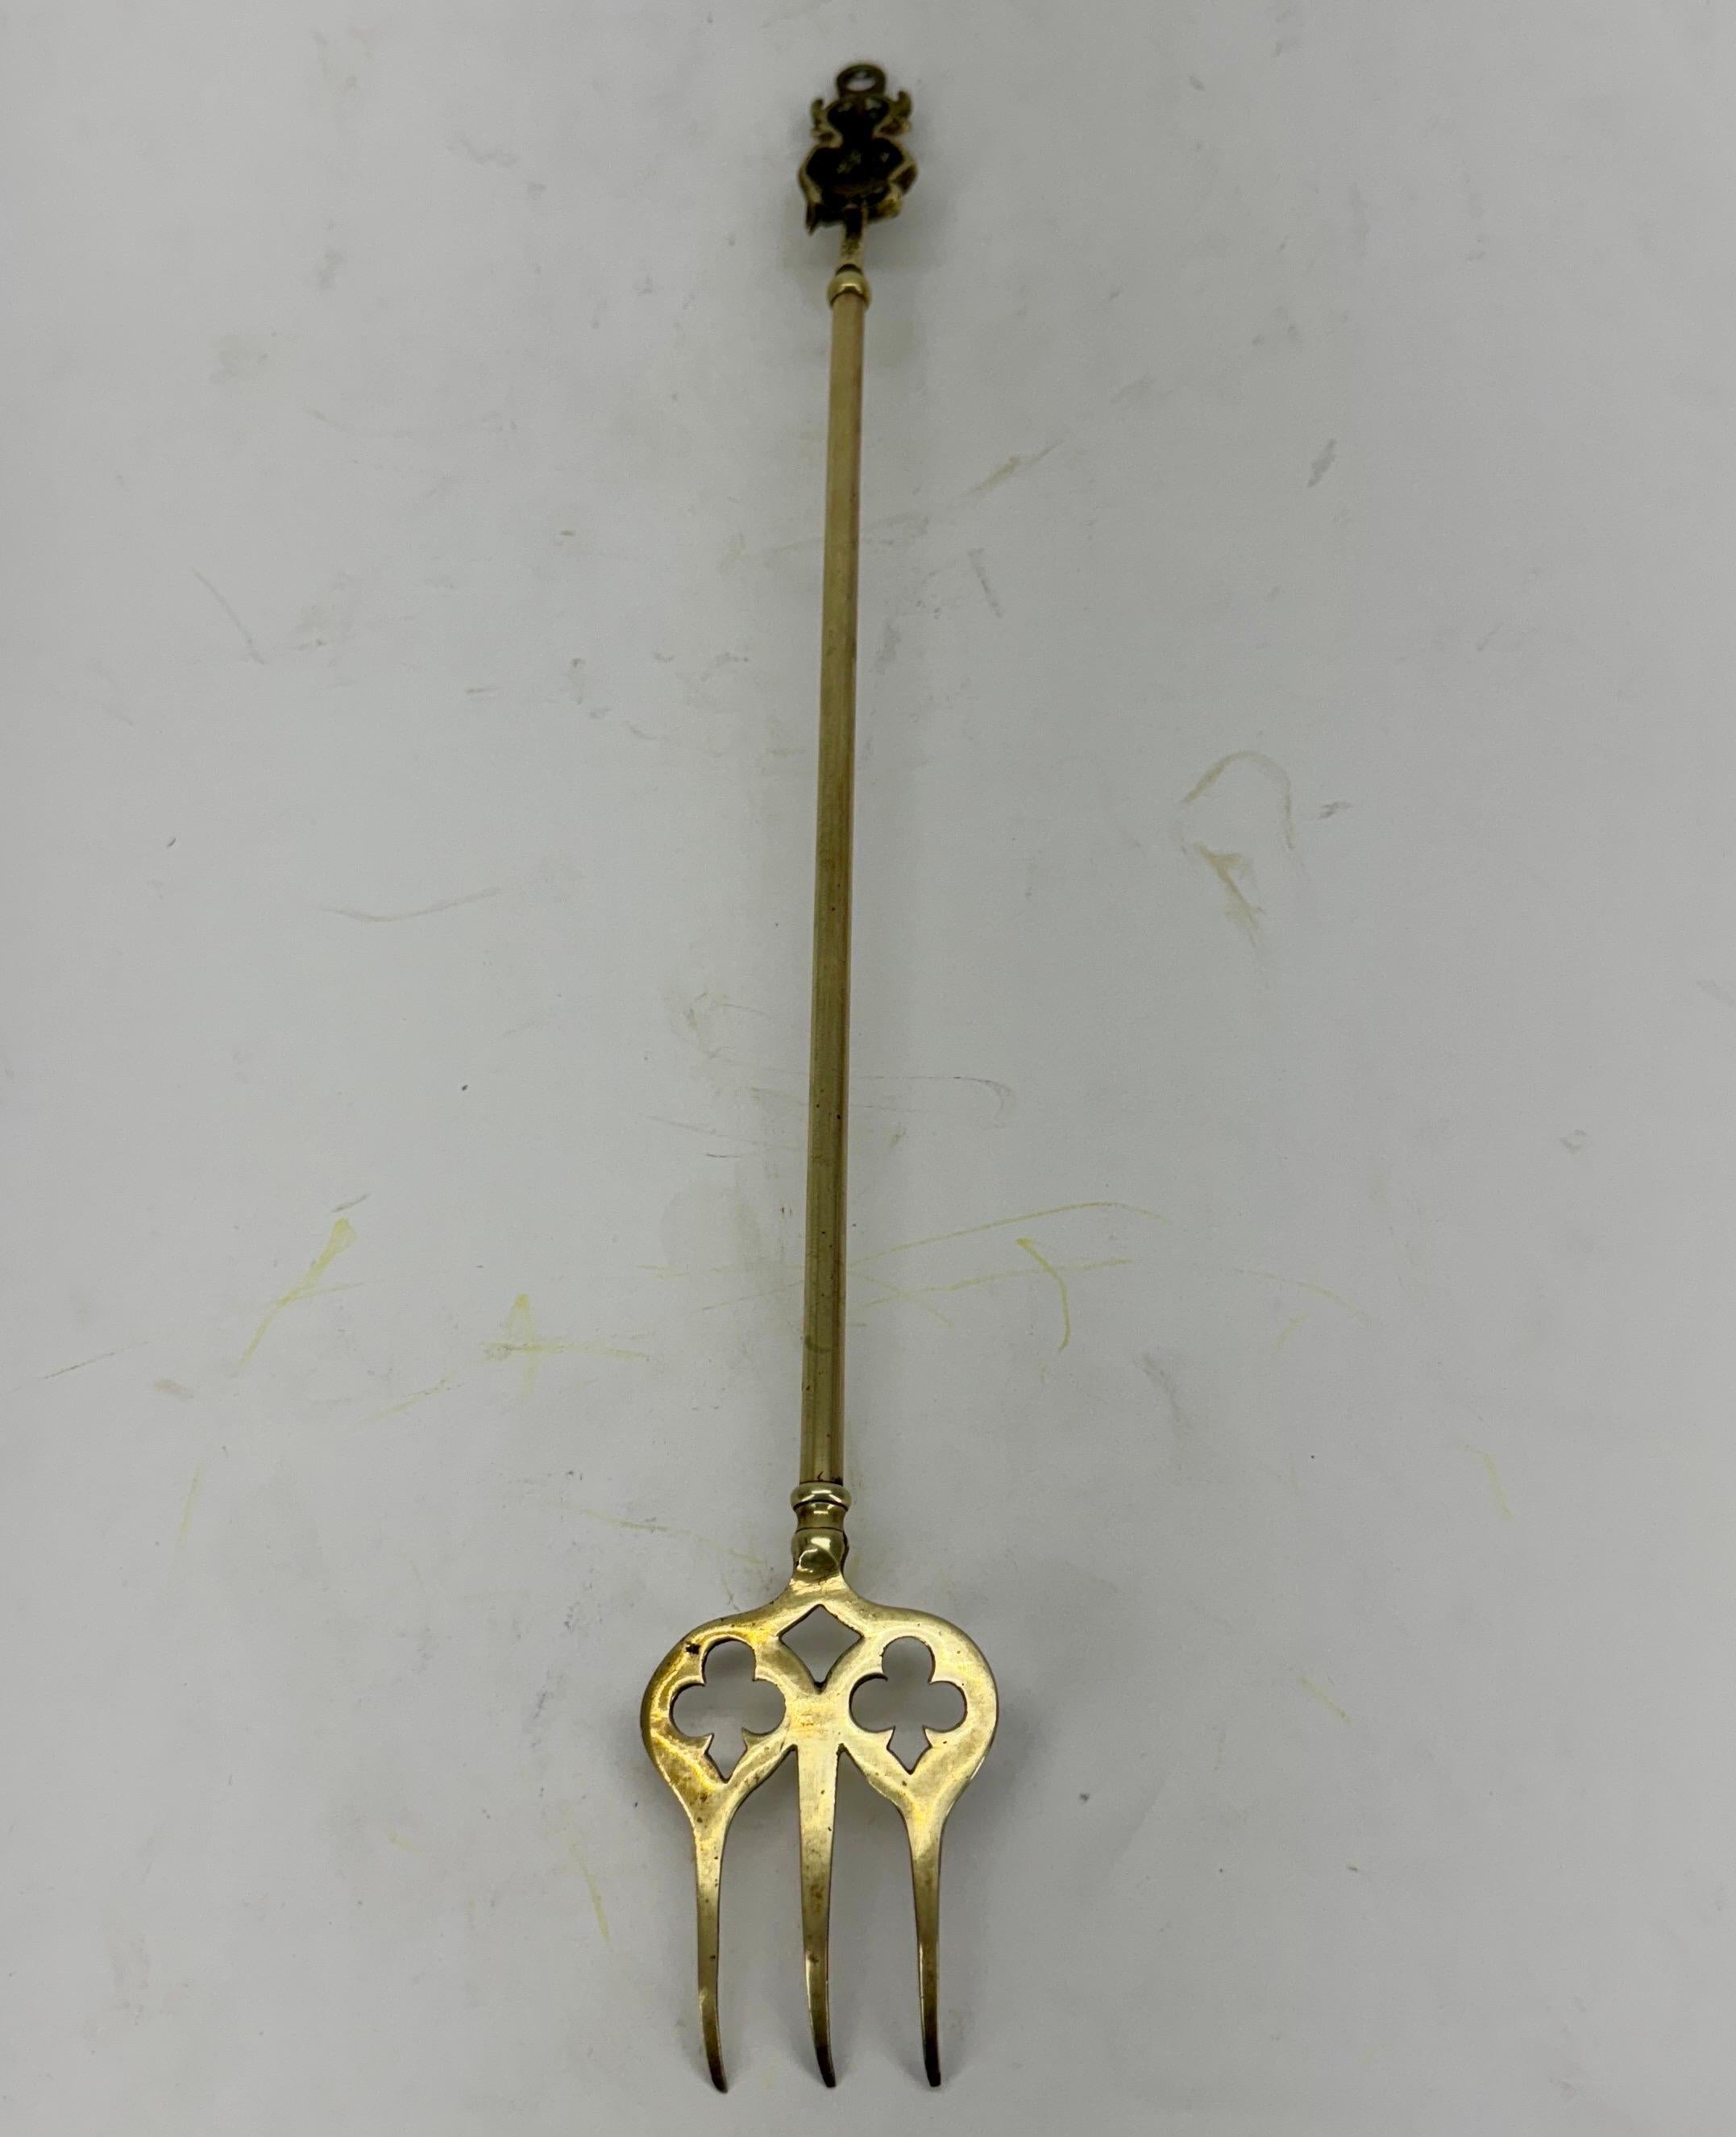 Danish Antique Brass Fireplace Neptune Toasting-fork For Sale 1